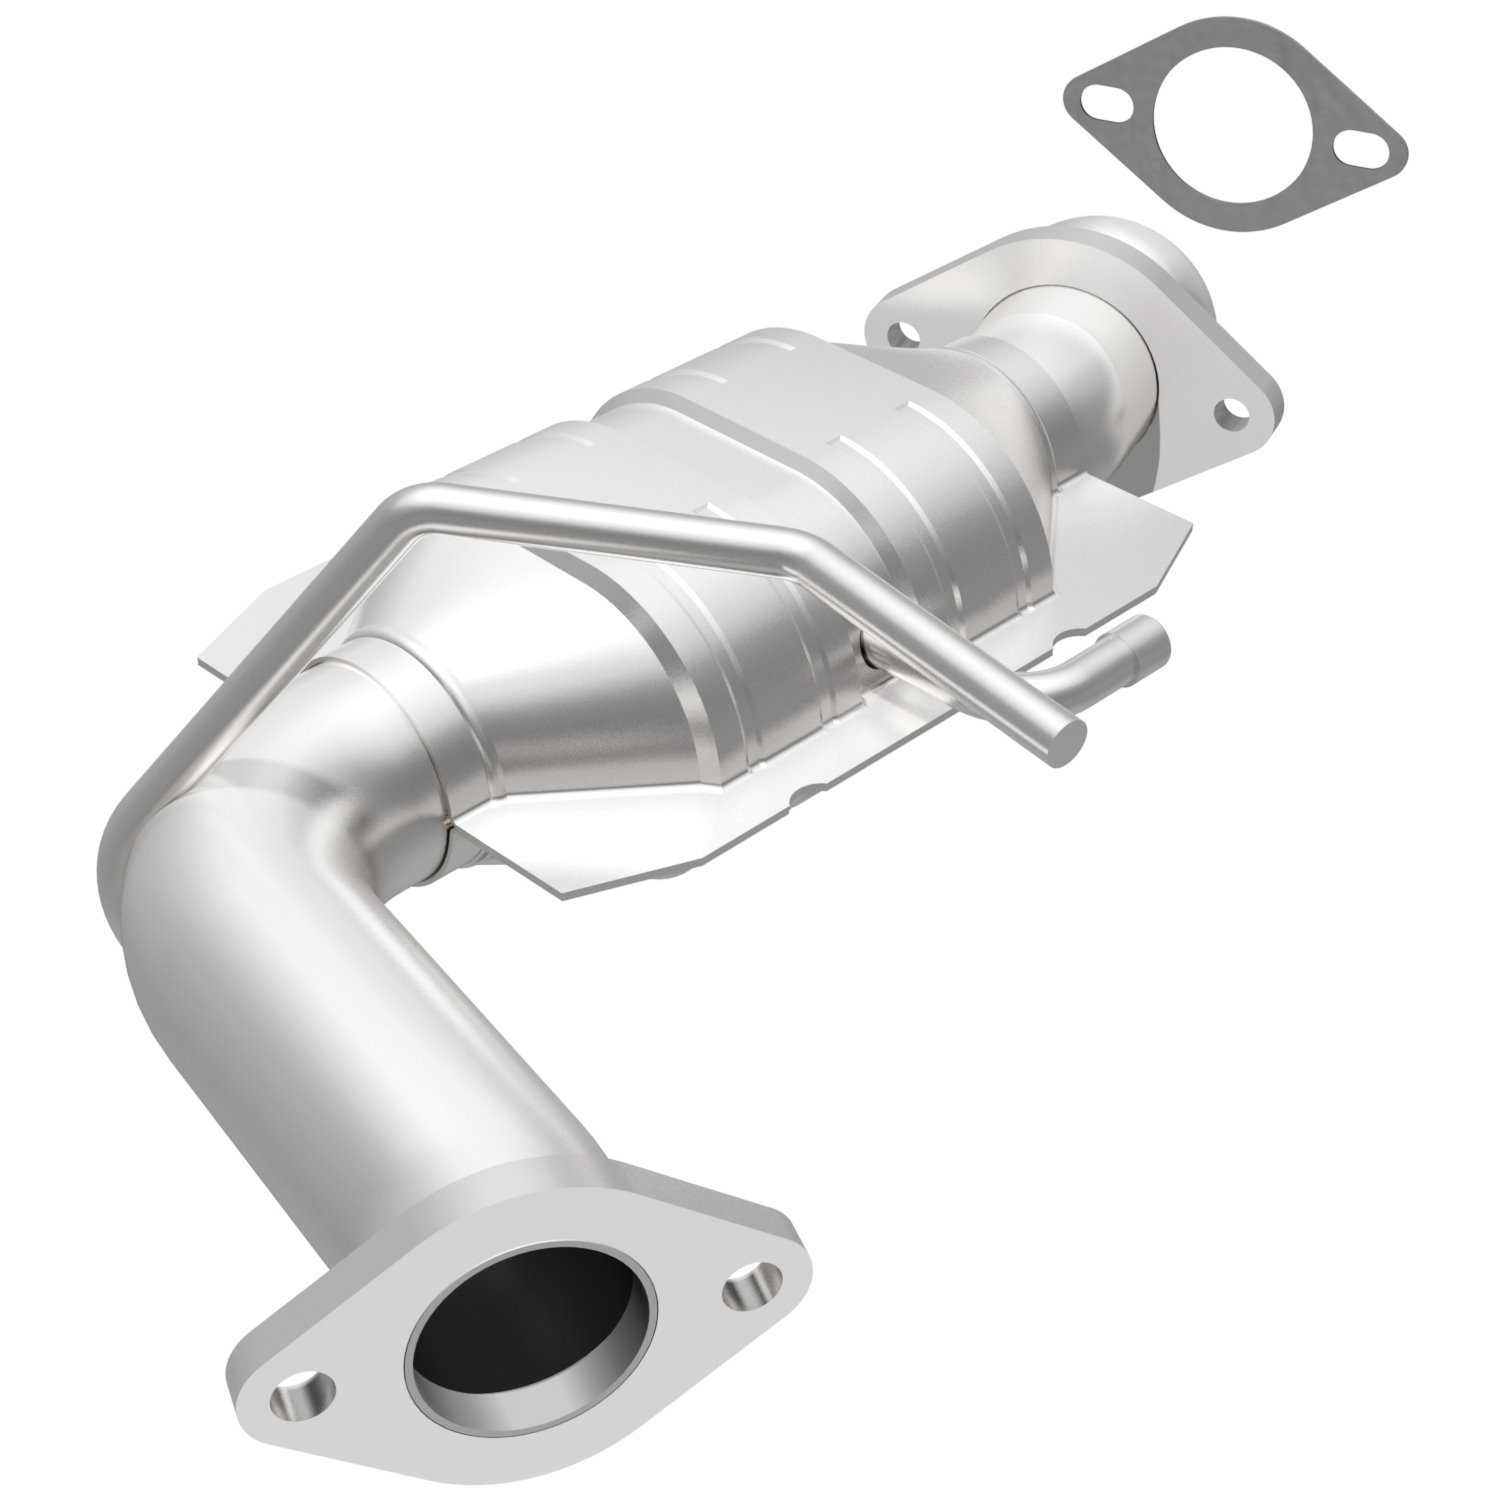 1978-1982 Ford Fairmont Standard Grade Federal / EPA Compliant Direct-Fit Catalytic Converter